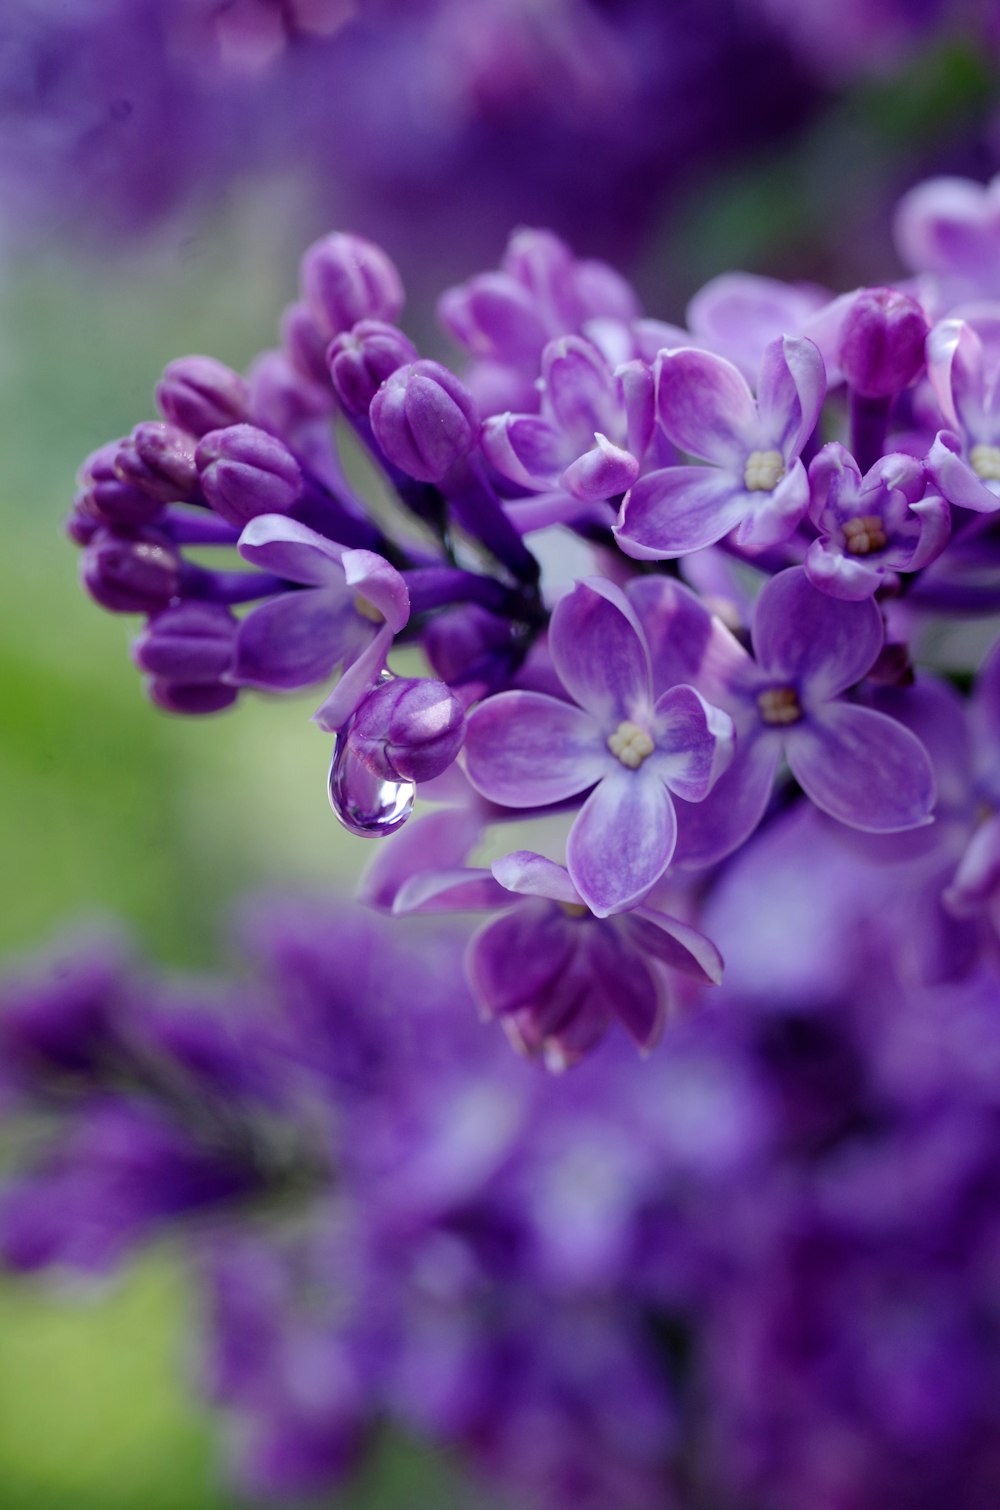 750+ Purple Flower Pictures | Download Free Images on Unsplash